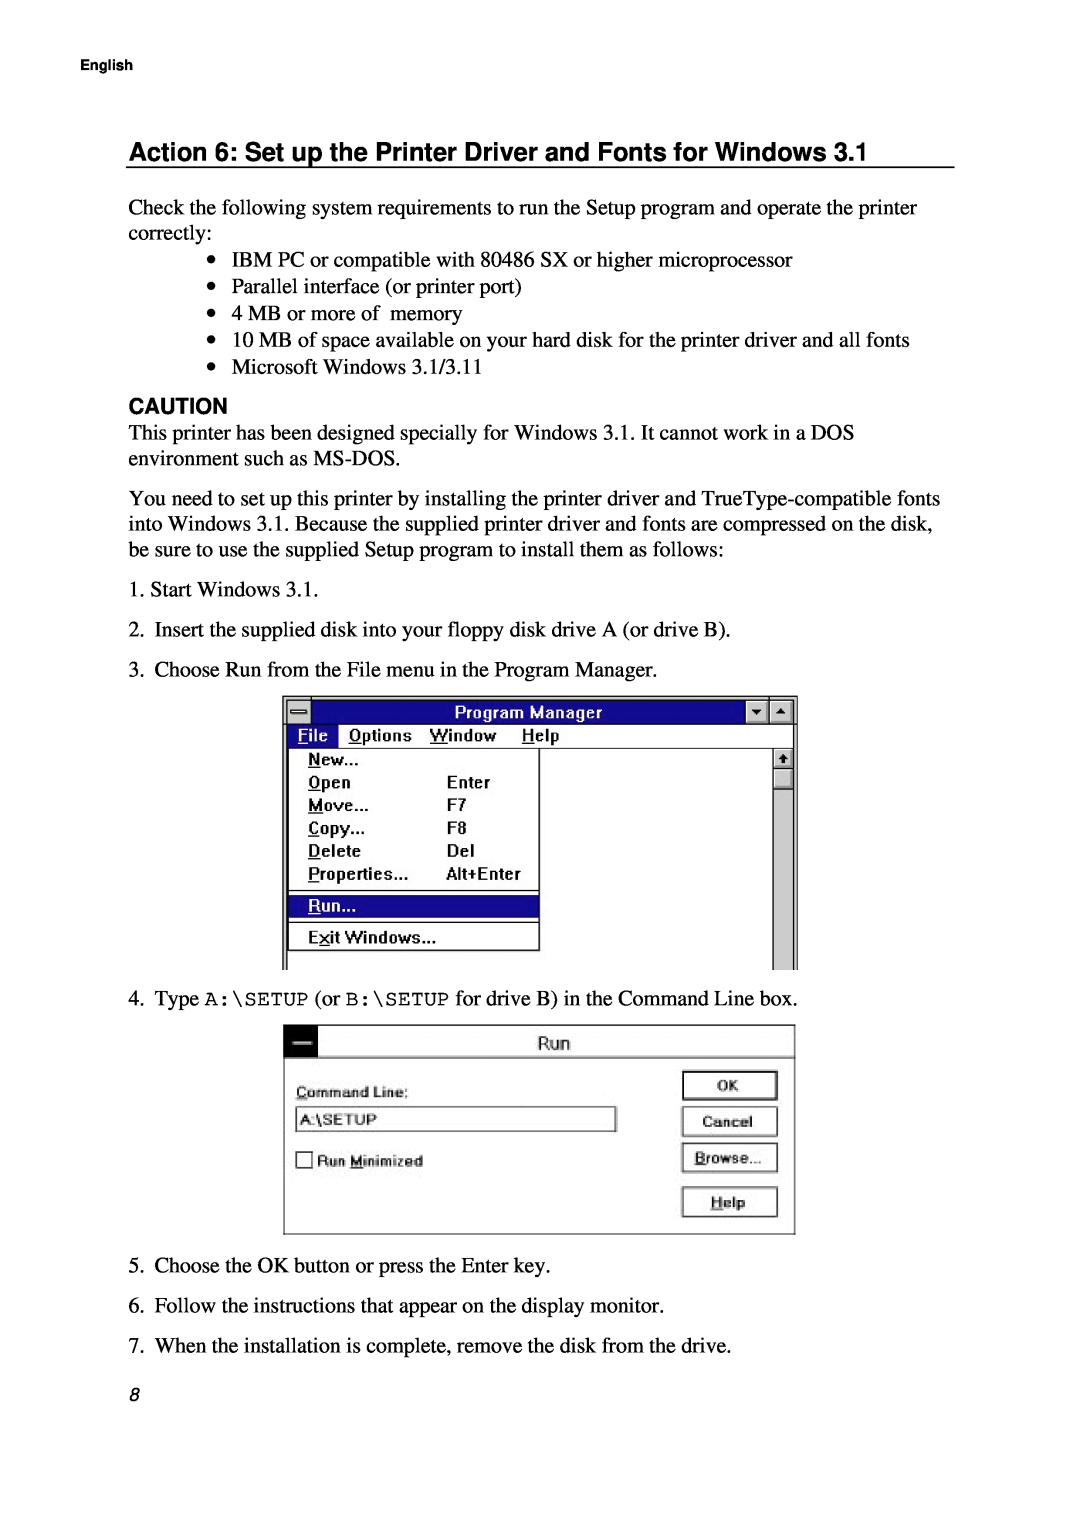 Brother WL-660 Series setup guide Action 6 Set up the Printer Driver and Fonts for Windows 